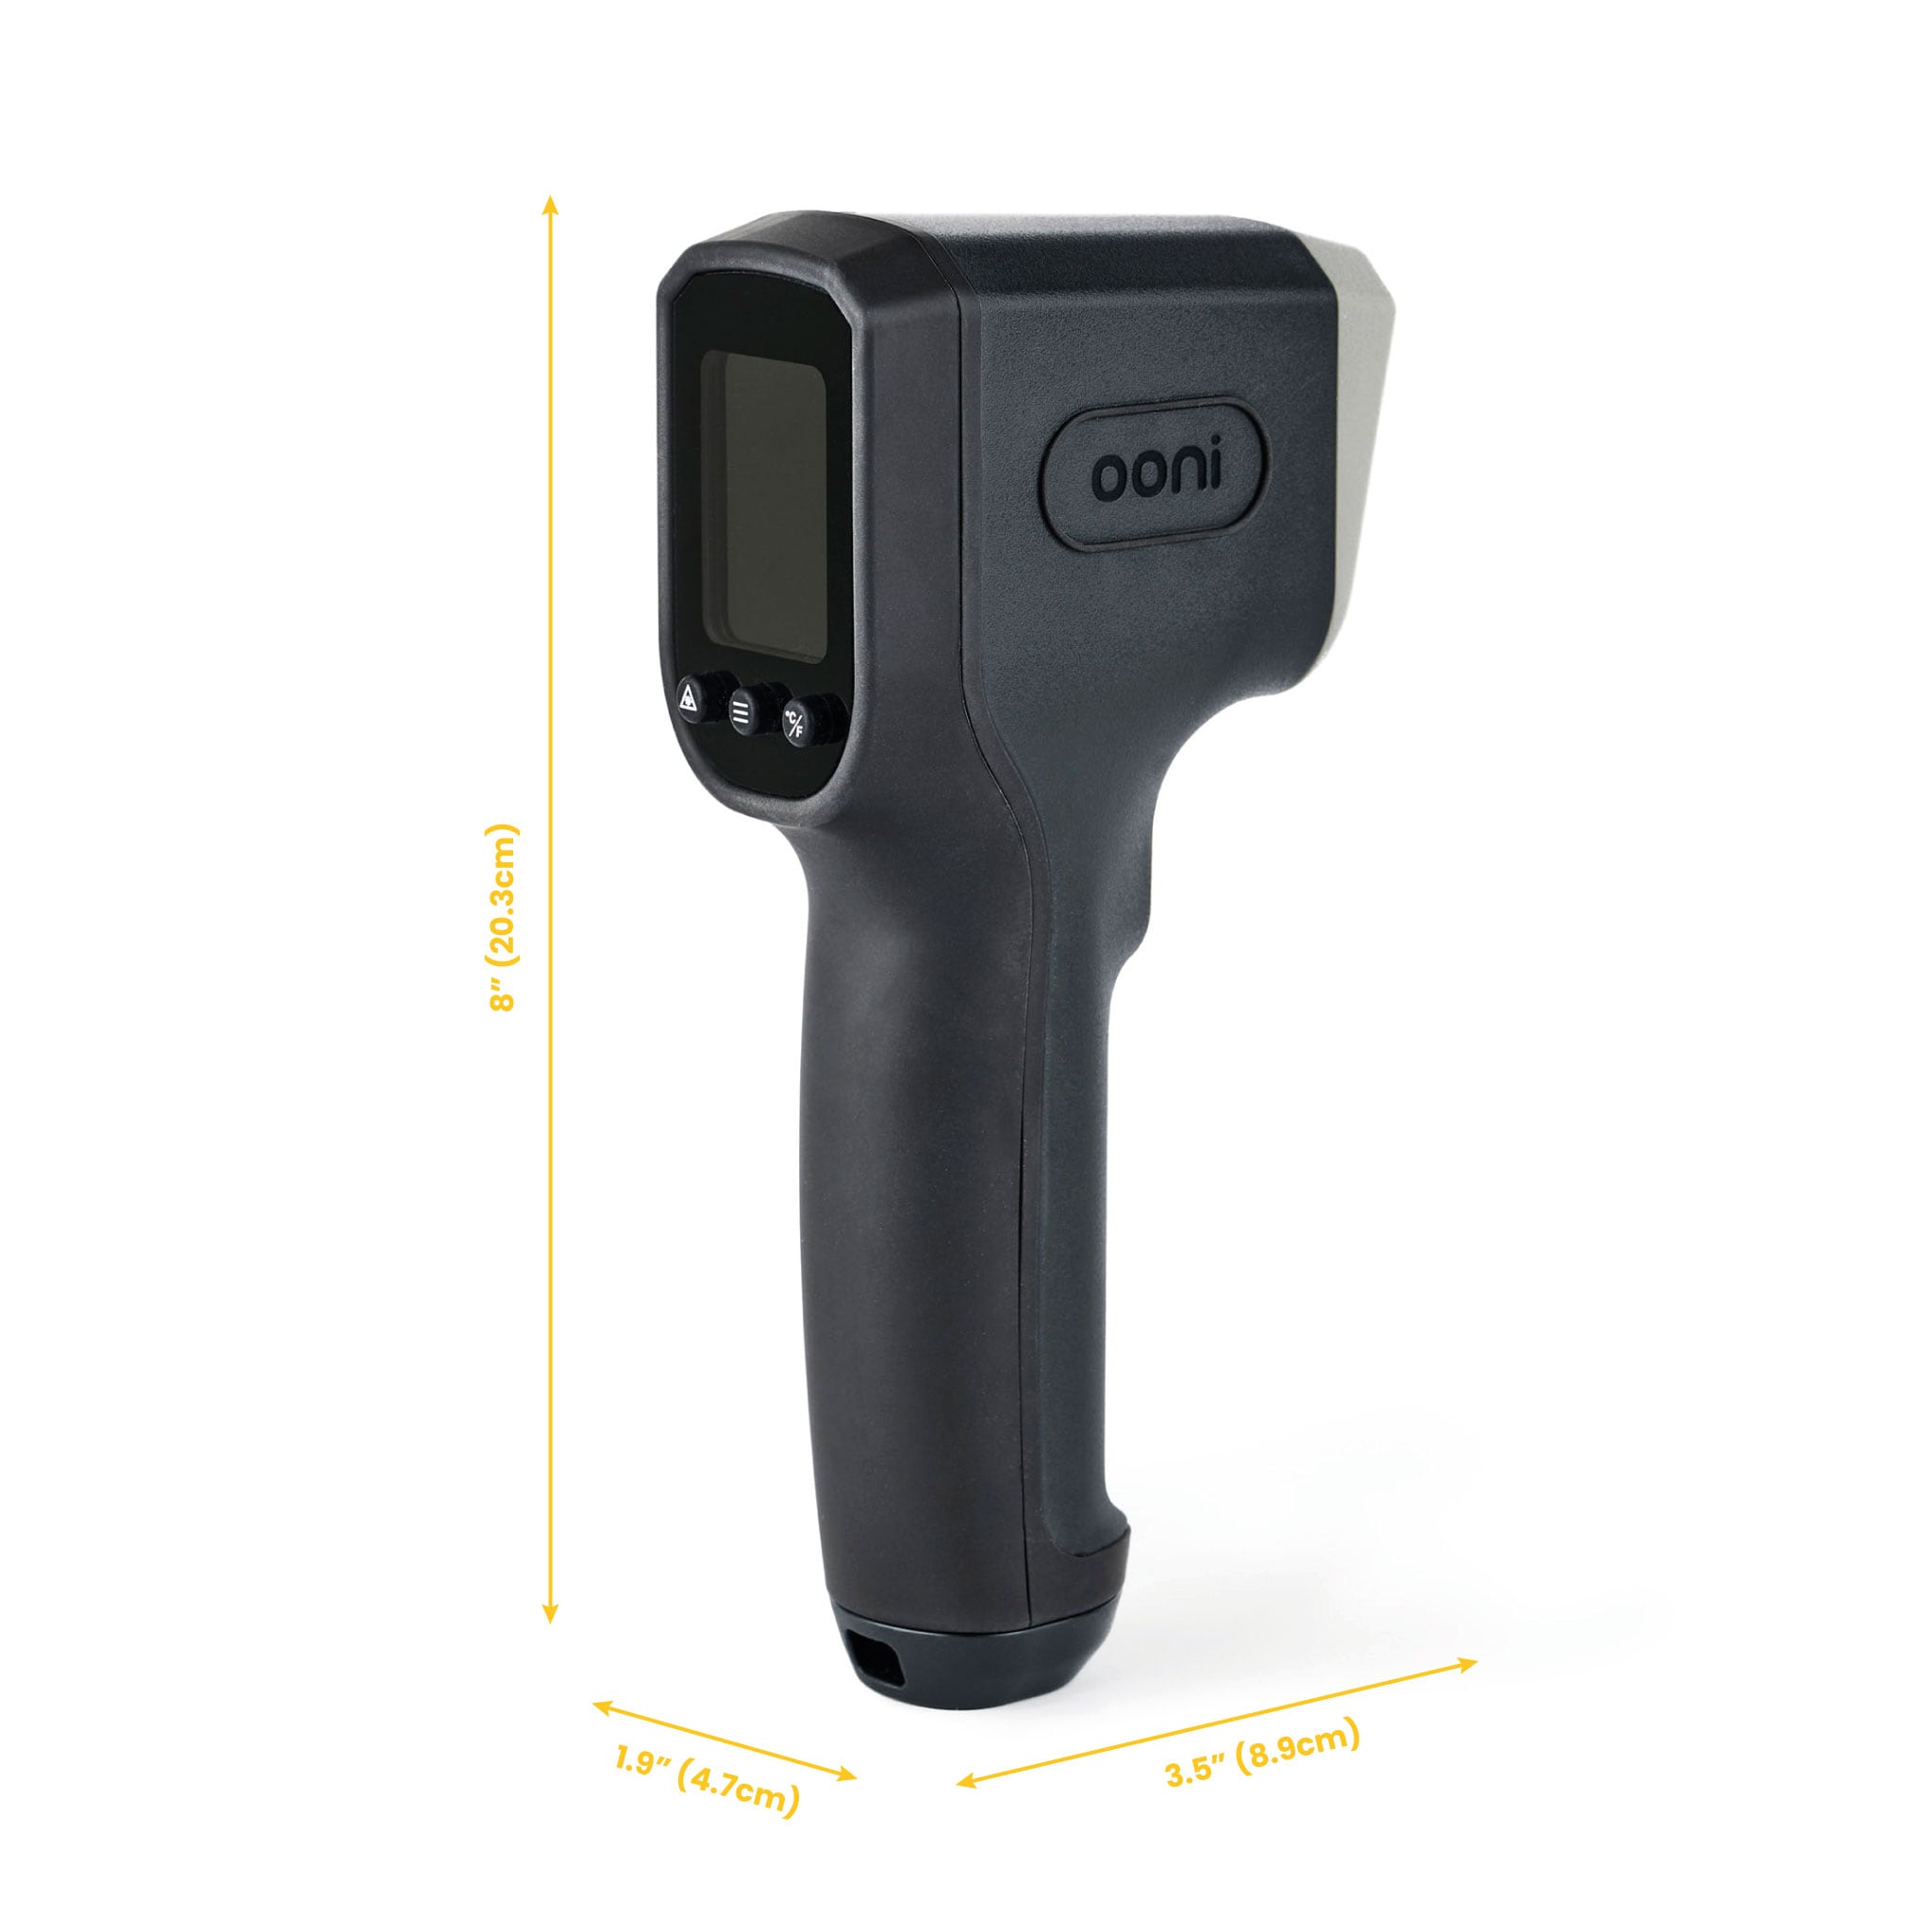 Honest Review Of The Blackstone Infrared Thermometer With Instant